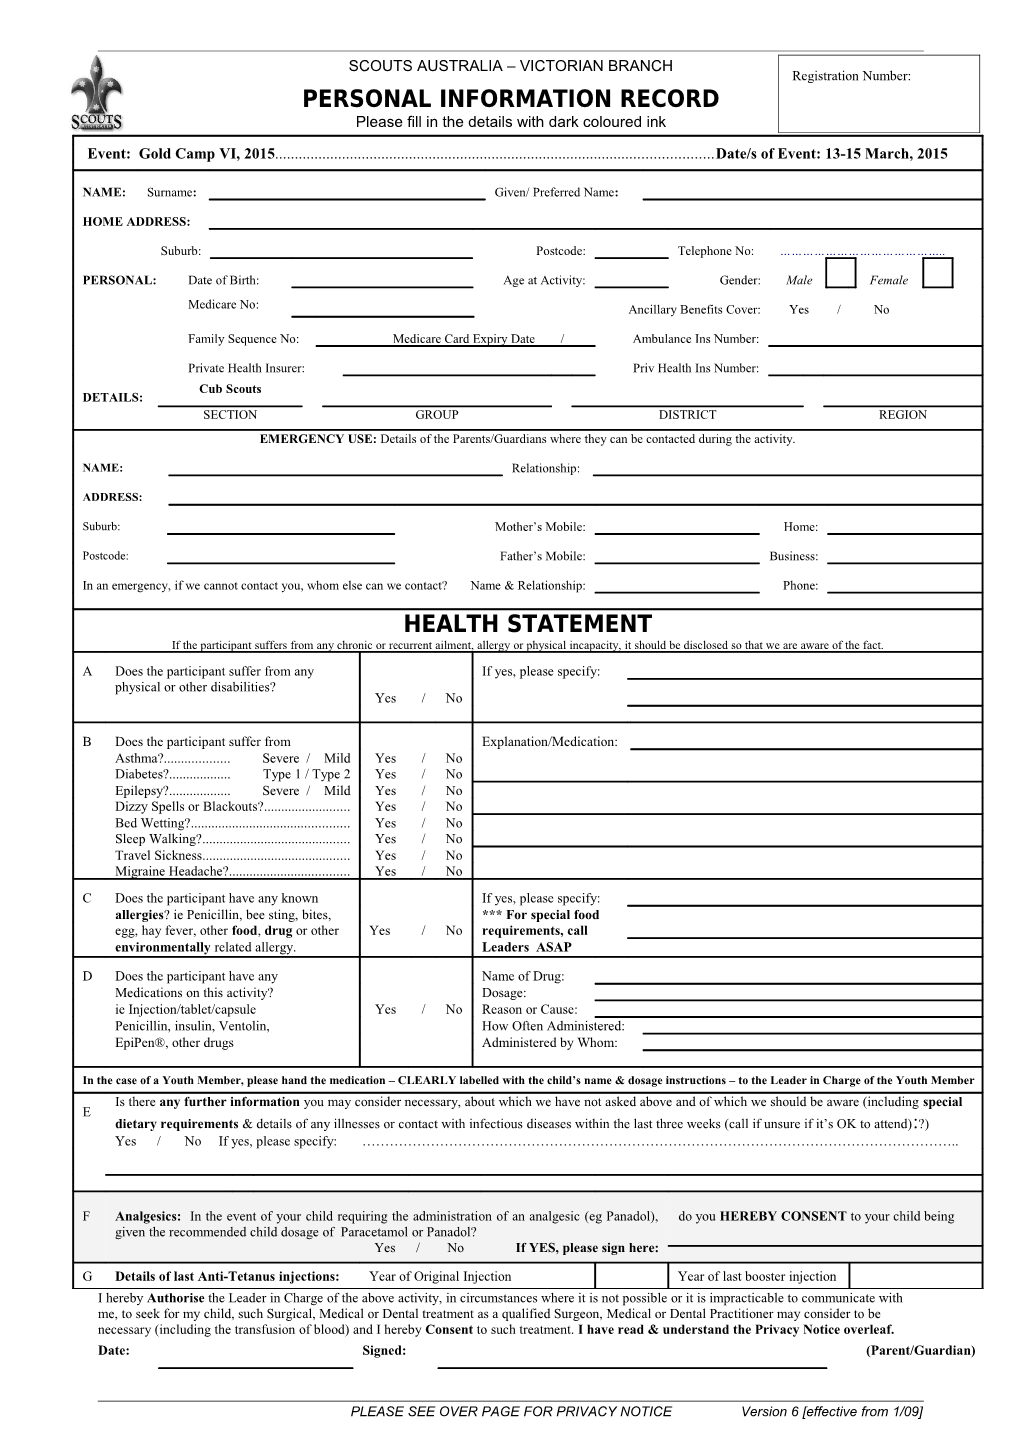 Personal Information Record (Health Form)